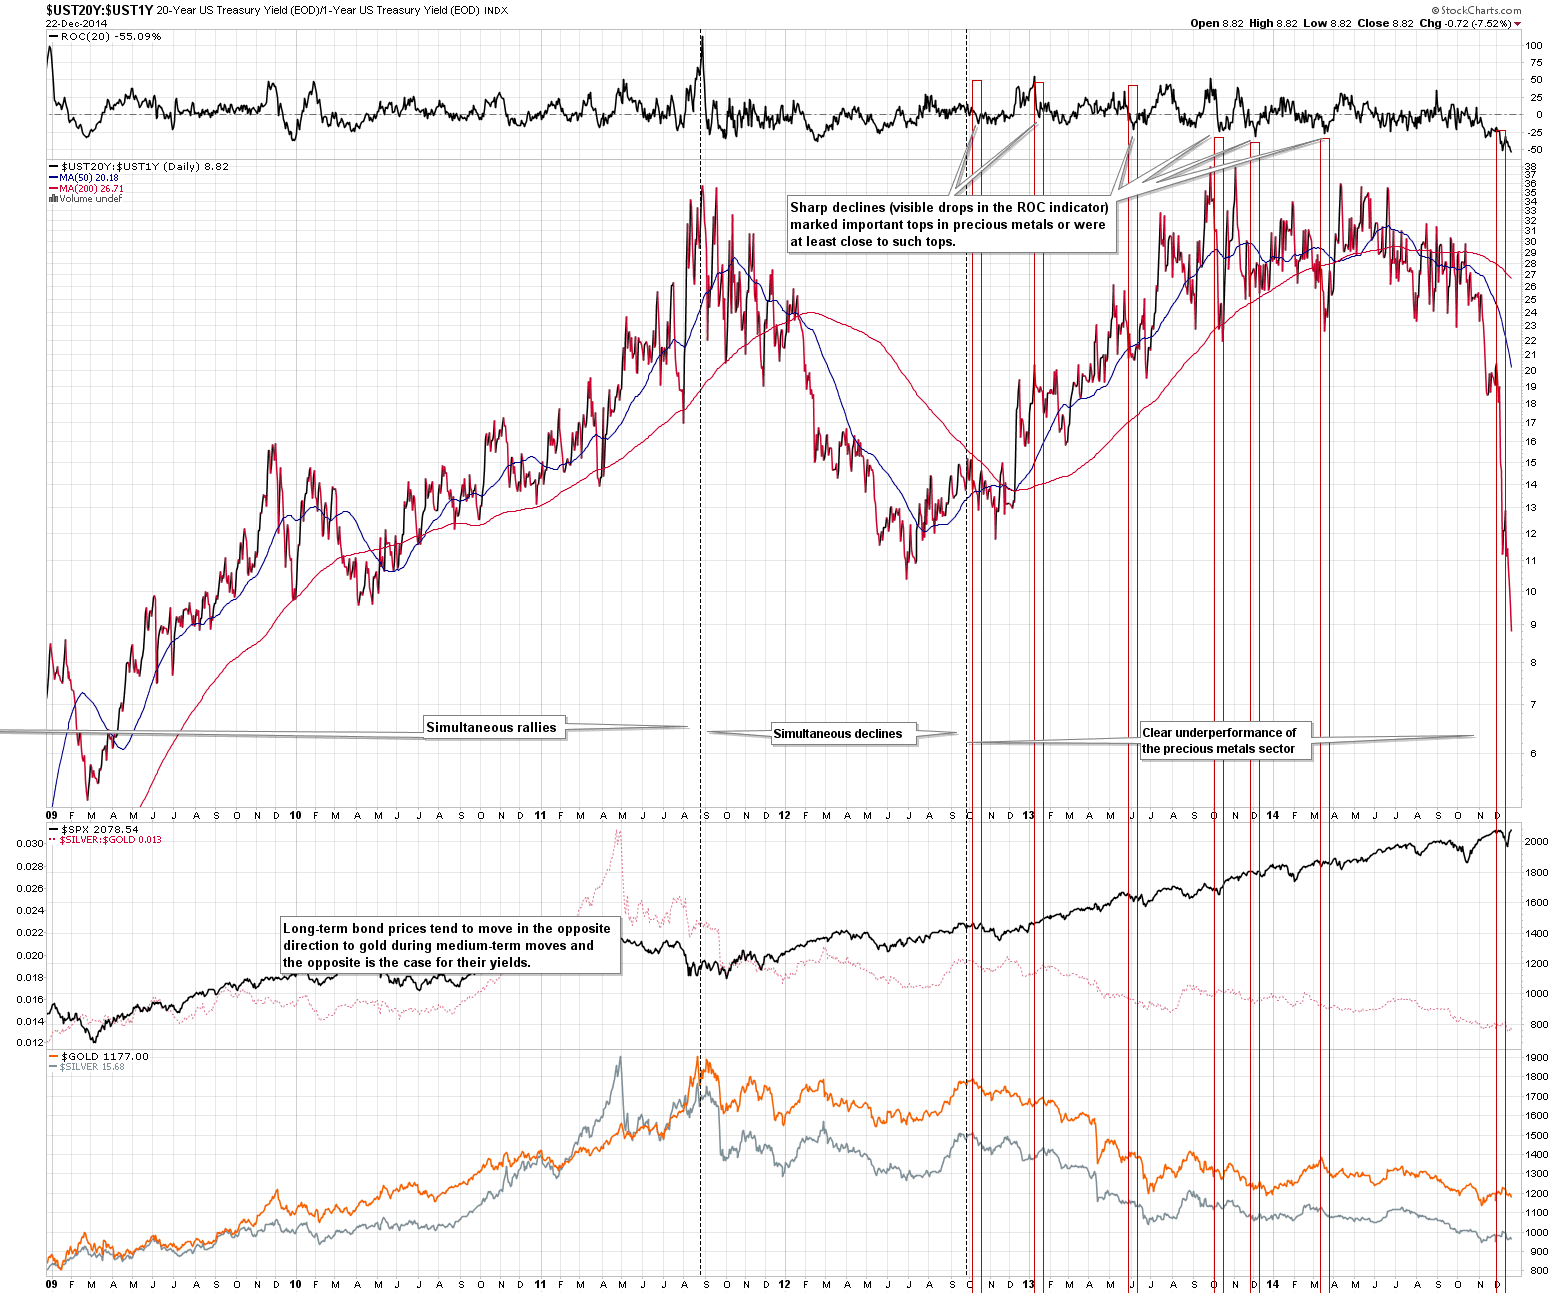 UST20Y:UST1Y - Gold and ratio of US Treasury Yields